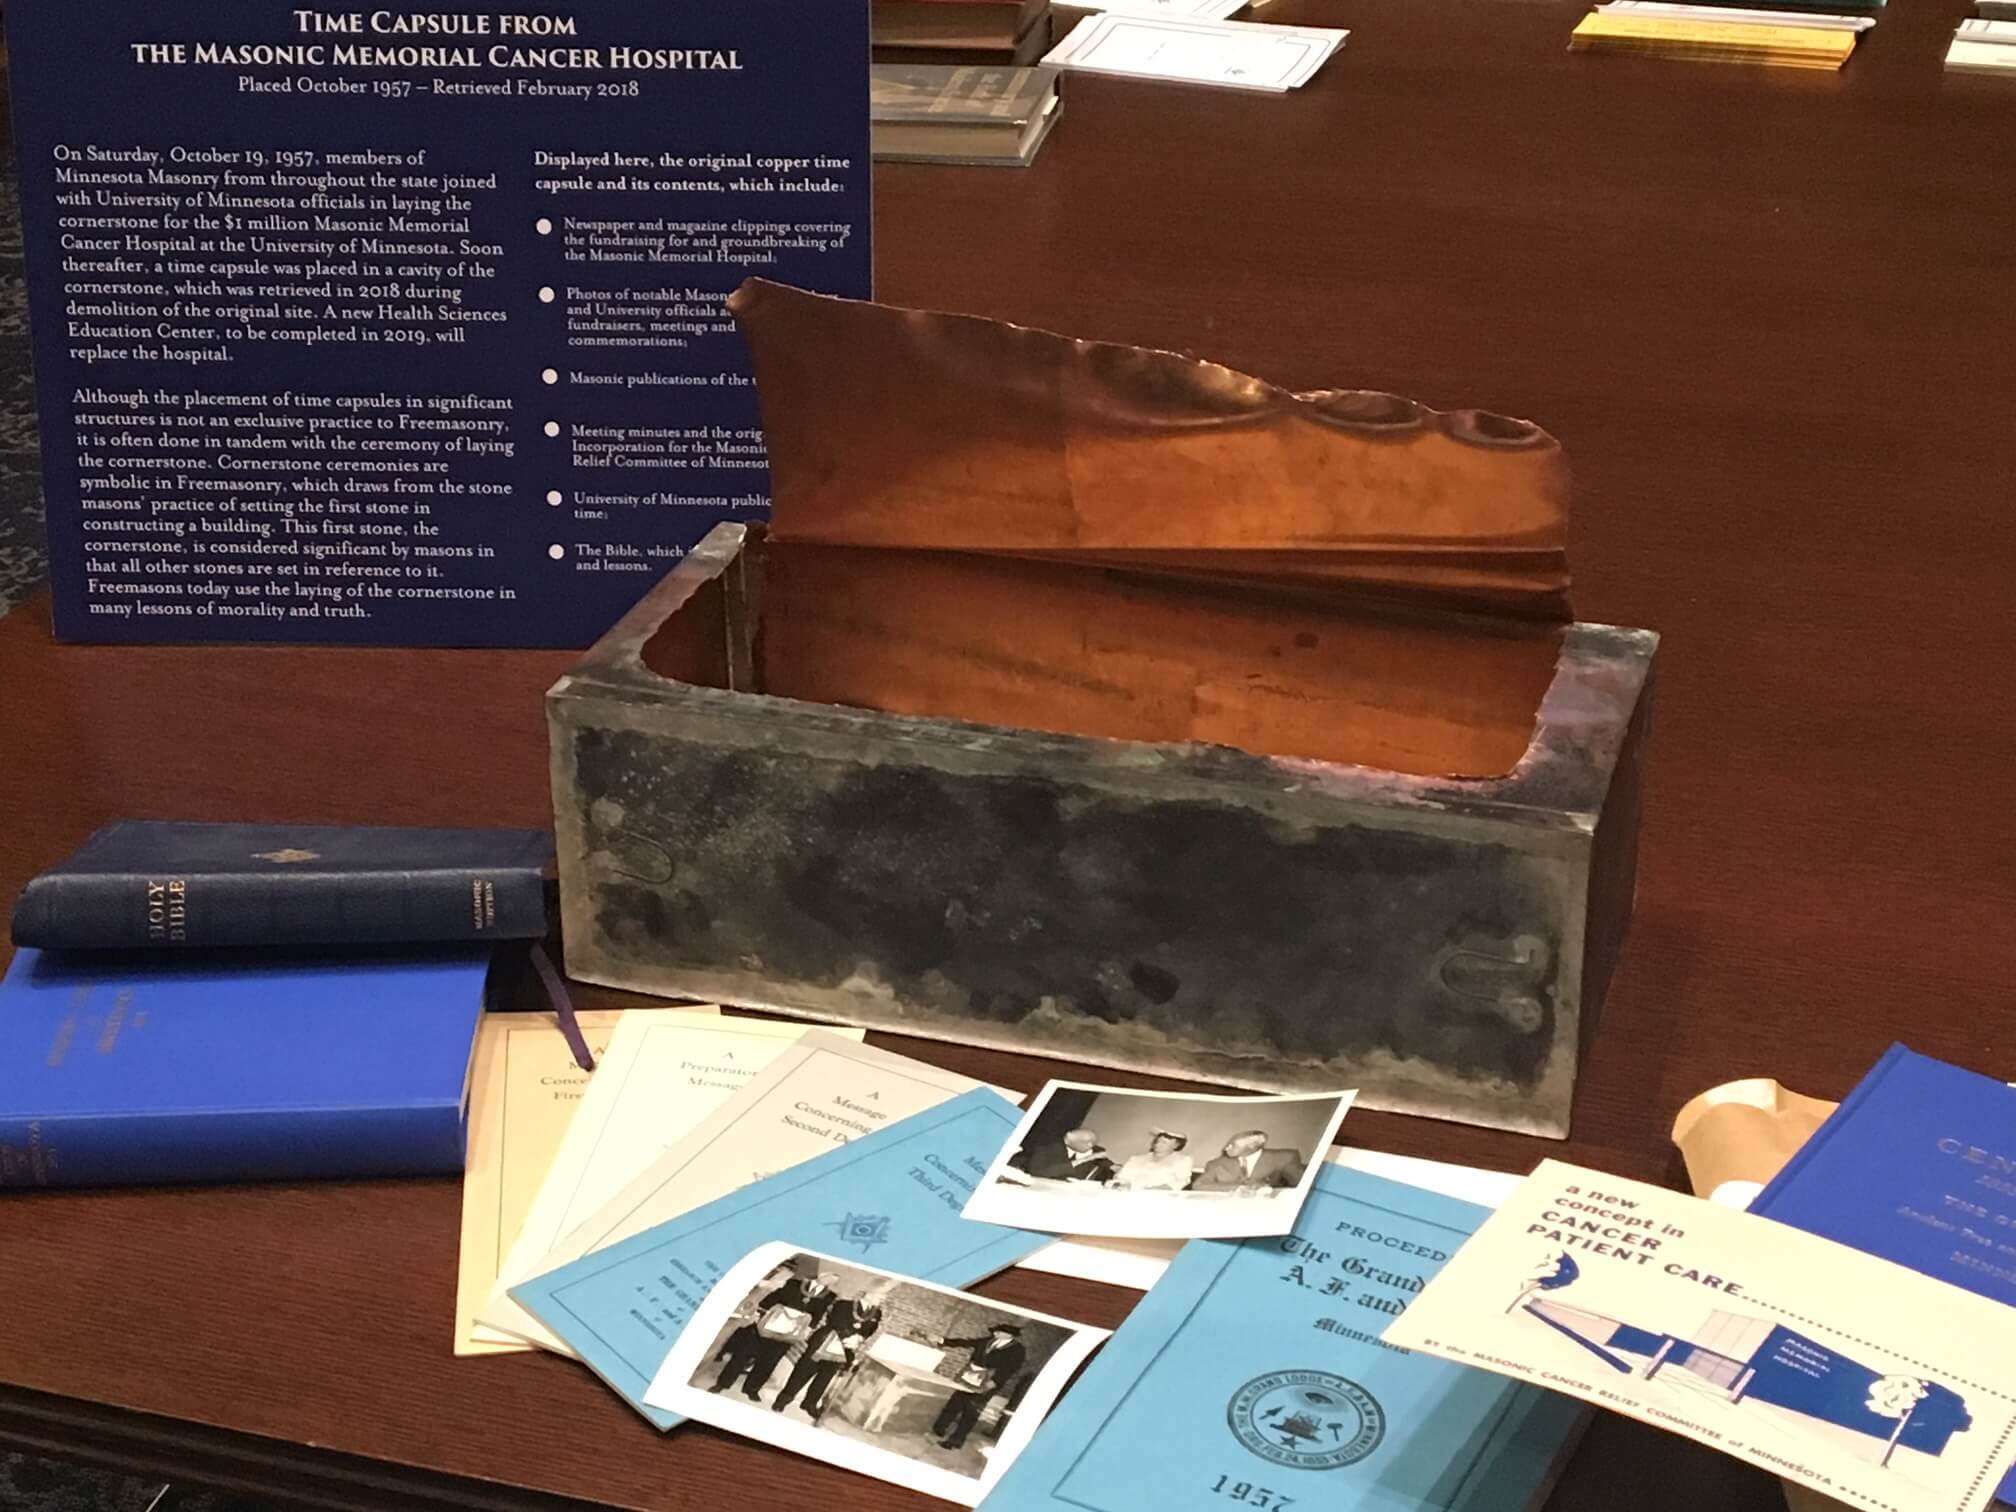 Time capsule and contents